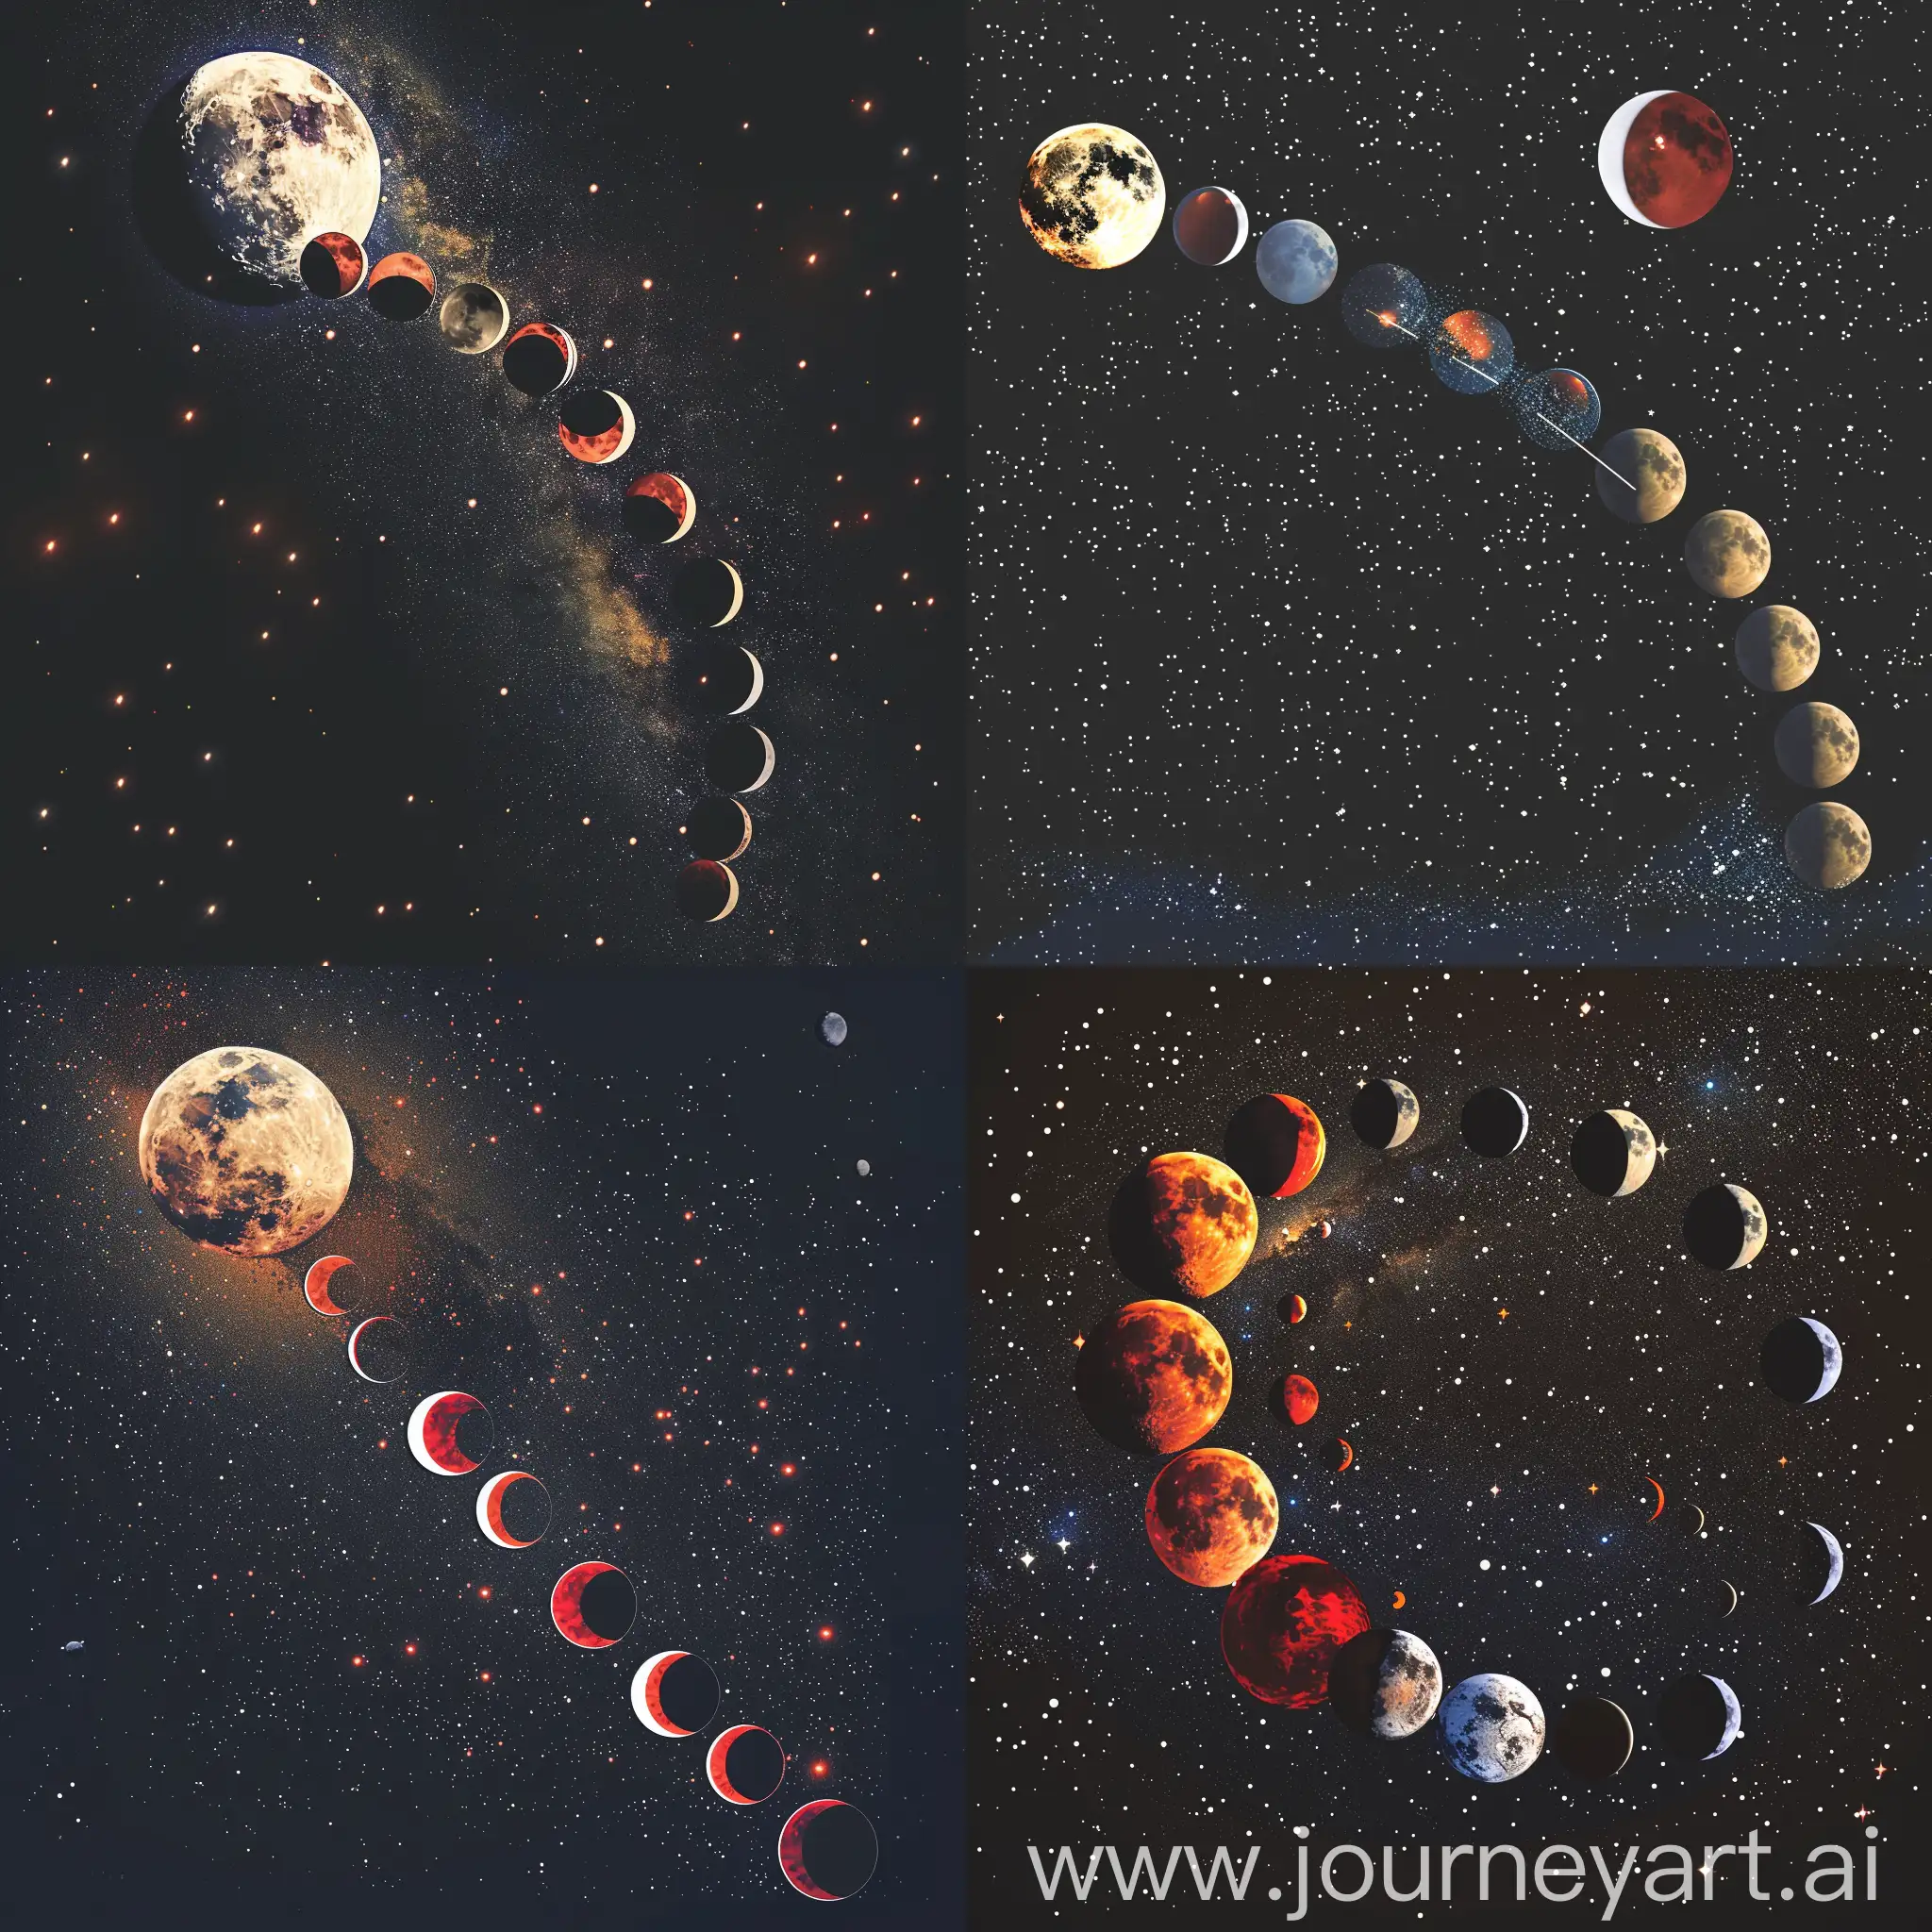 make me an animation about lunar and solar eclipse in the space, full of stars bacground, ellipse orbit of moon around earth, show the different phases of moon in its orbit, duration of the animation is 5 minutes, in scratch code